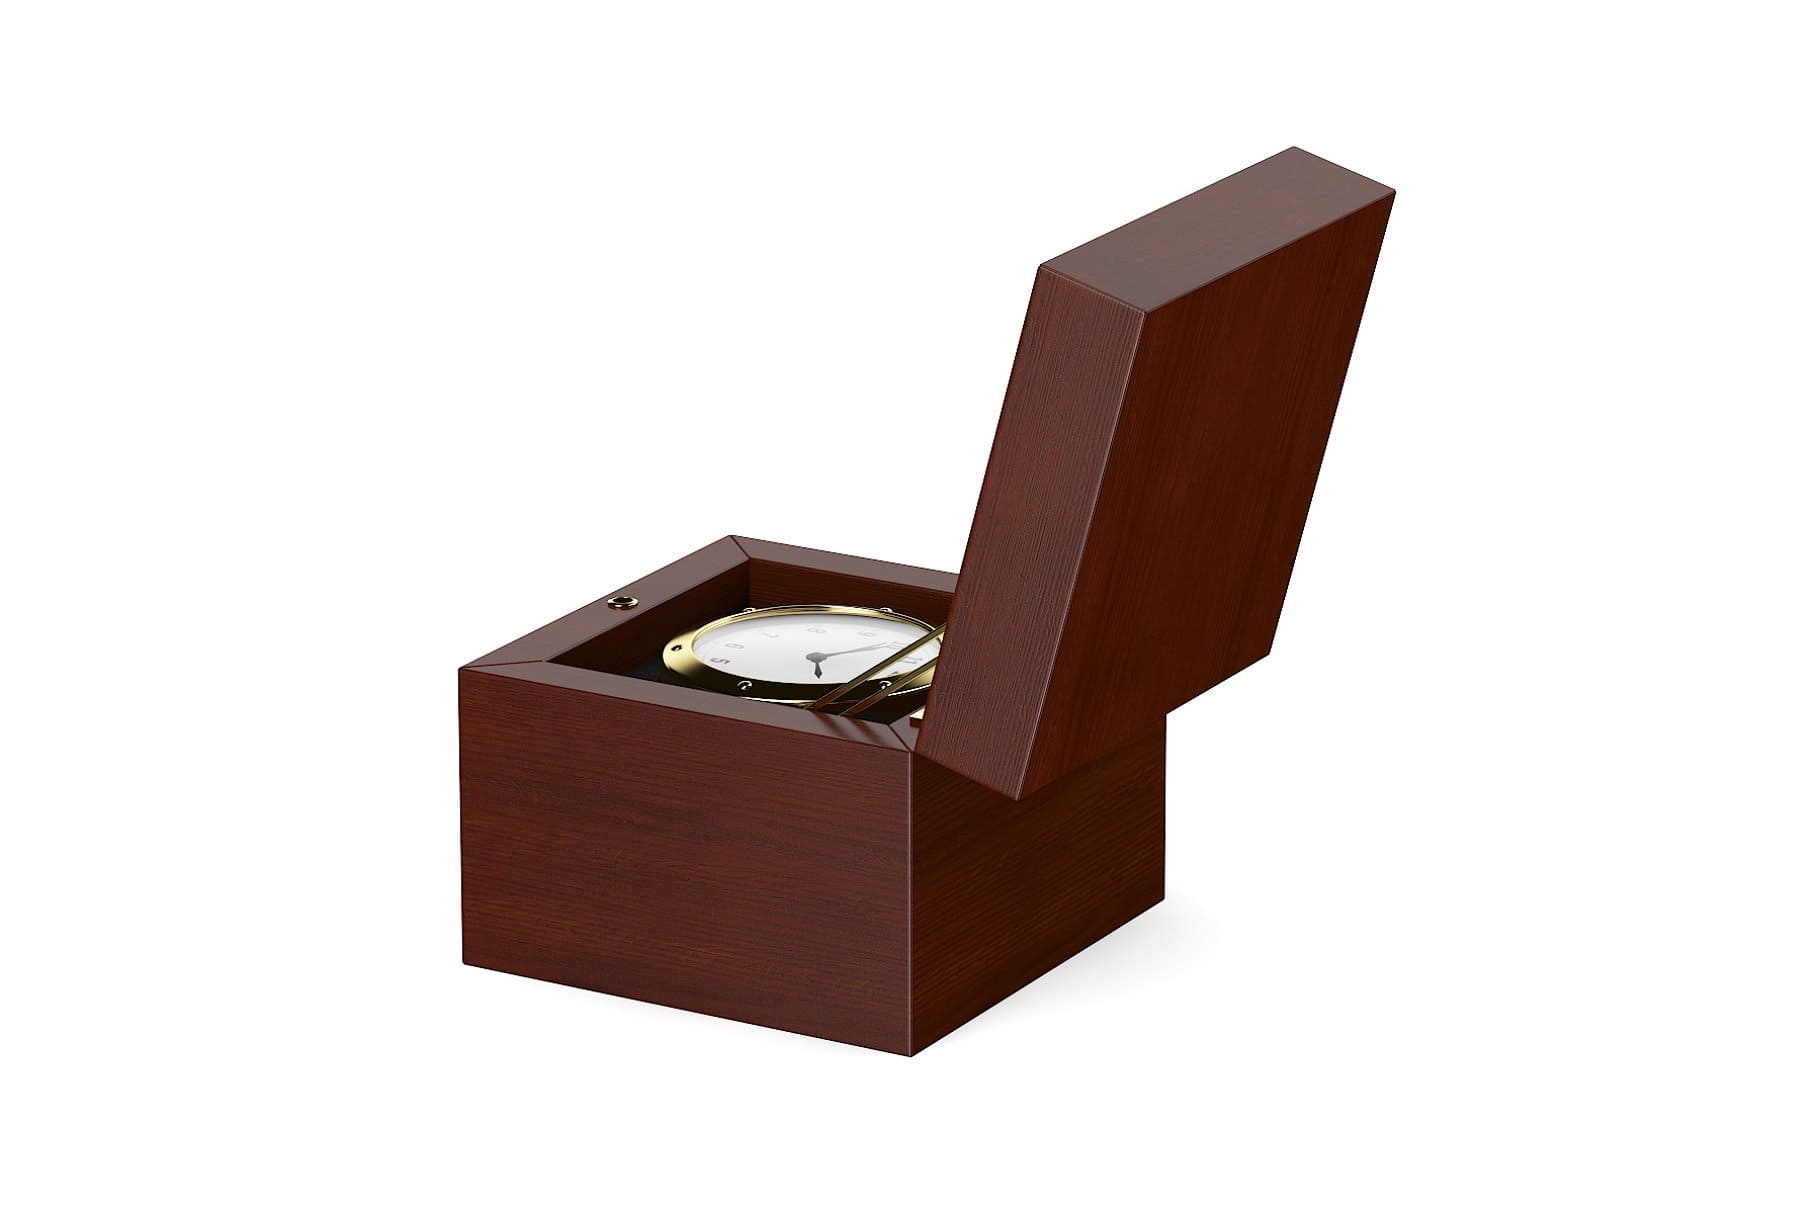 A box made of dark brown wood with a large gold watch in the middle.